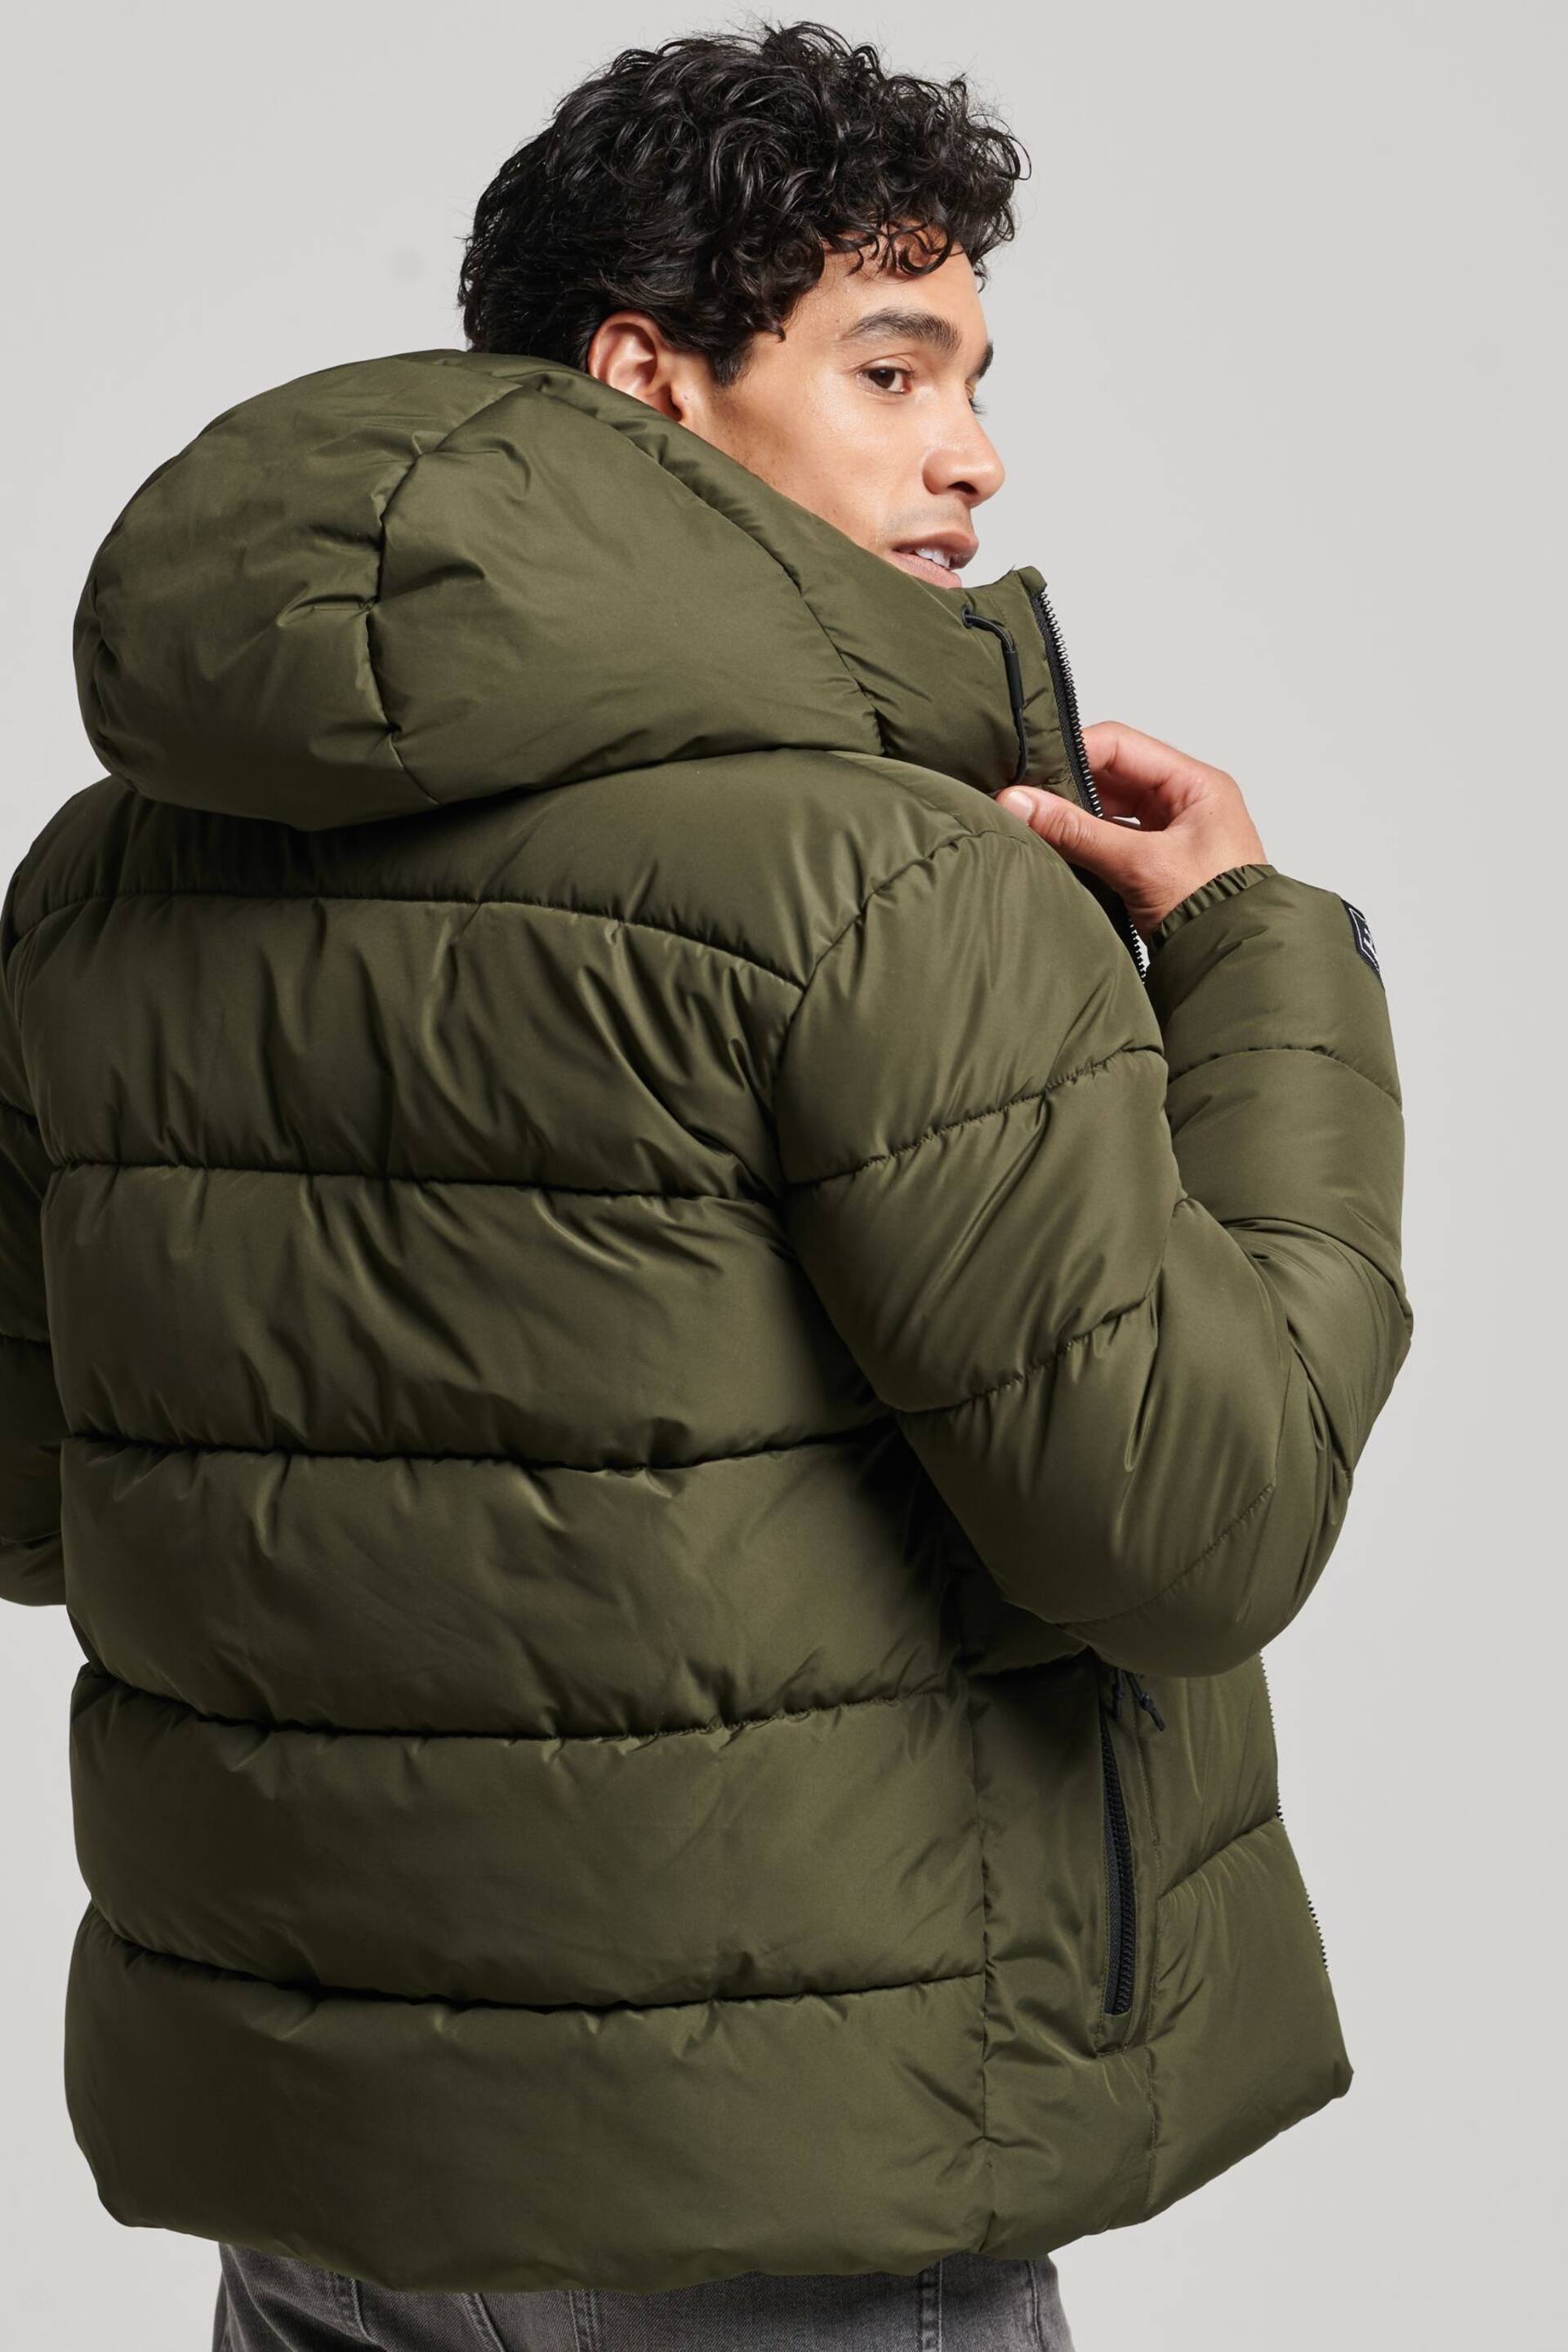 Superdry Dark Moss Hooded Mens Sports Puffer Jacket - Image 4 of 6